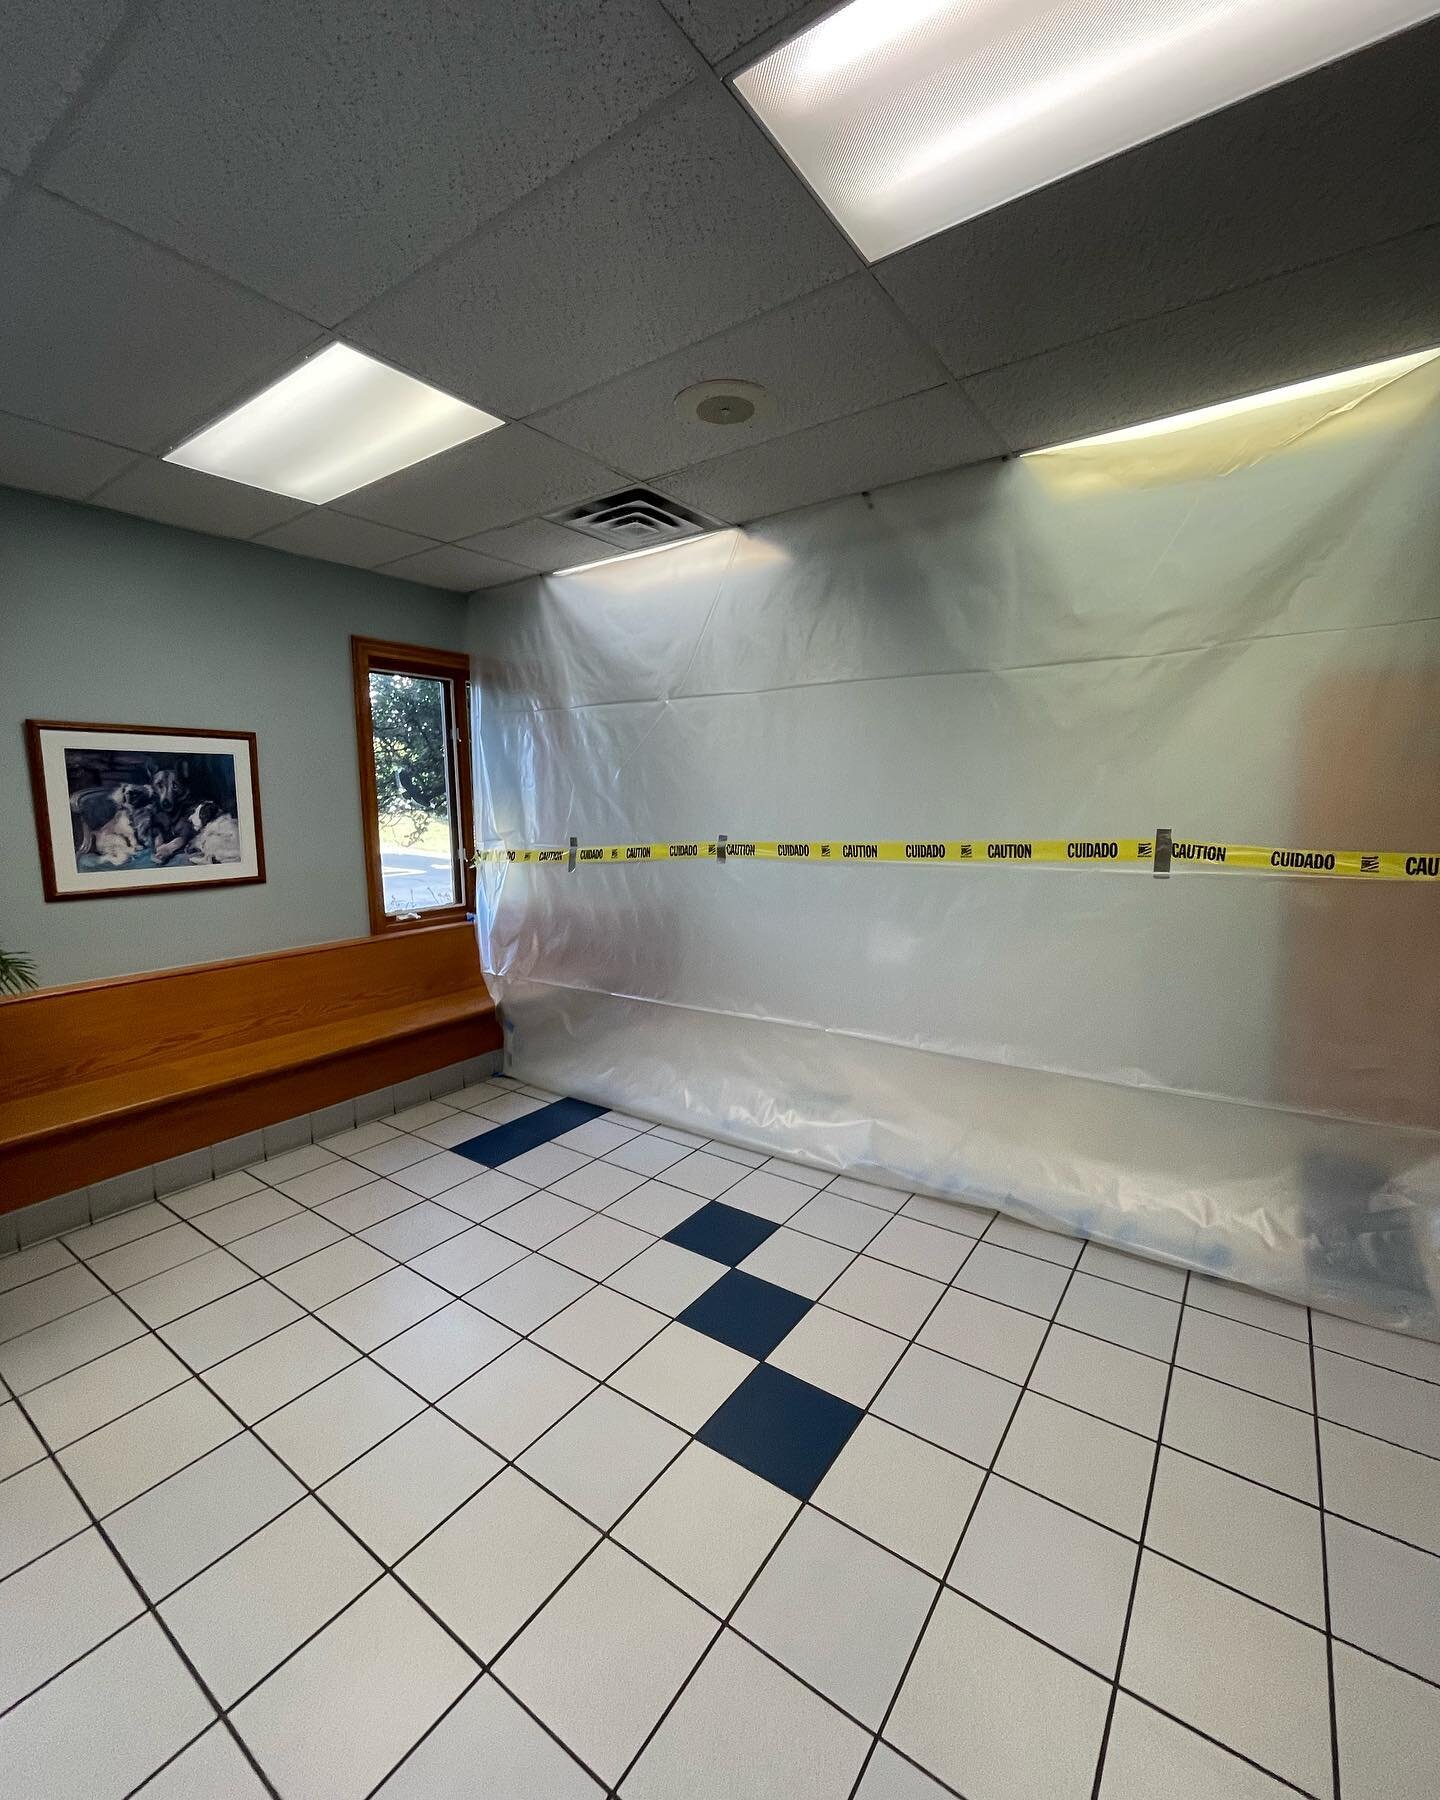 Have you been curious about the construction we have going on here at Cross Creeks?! 

Now that we have 3 full-time Doctors, we are renovating one side of our building to create 2 new exam rooms! Construction is moving along quickly, let&rsquo;s take